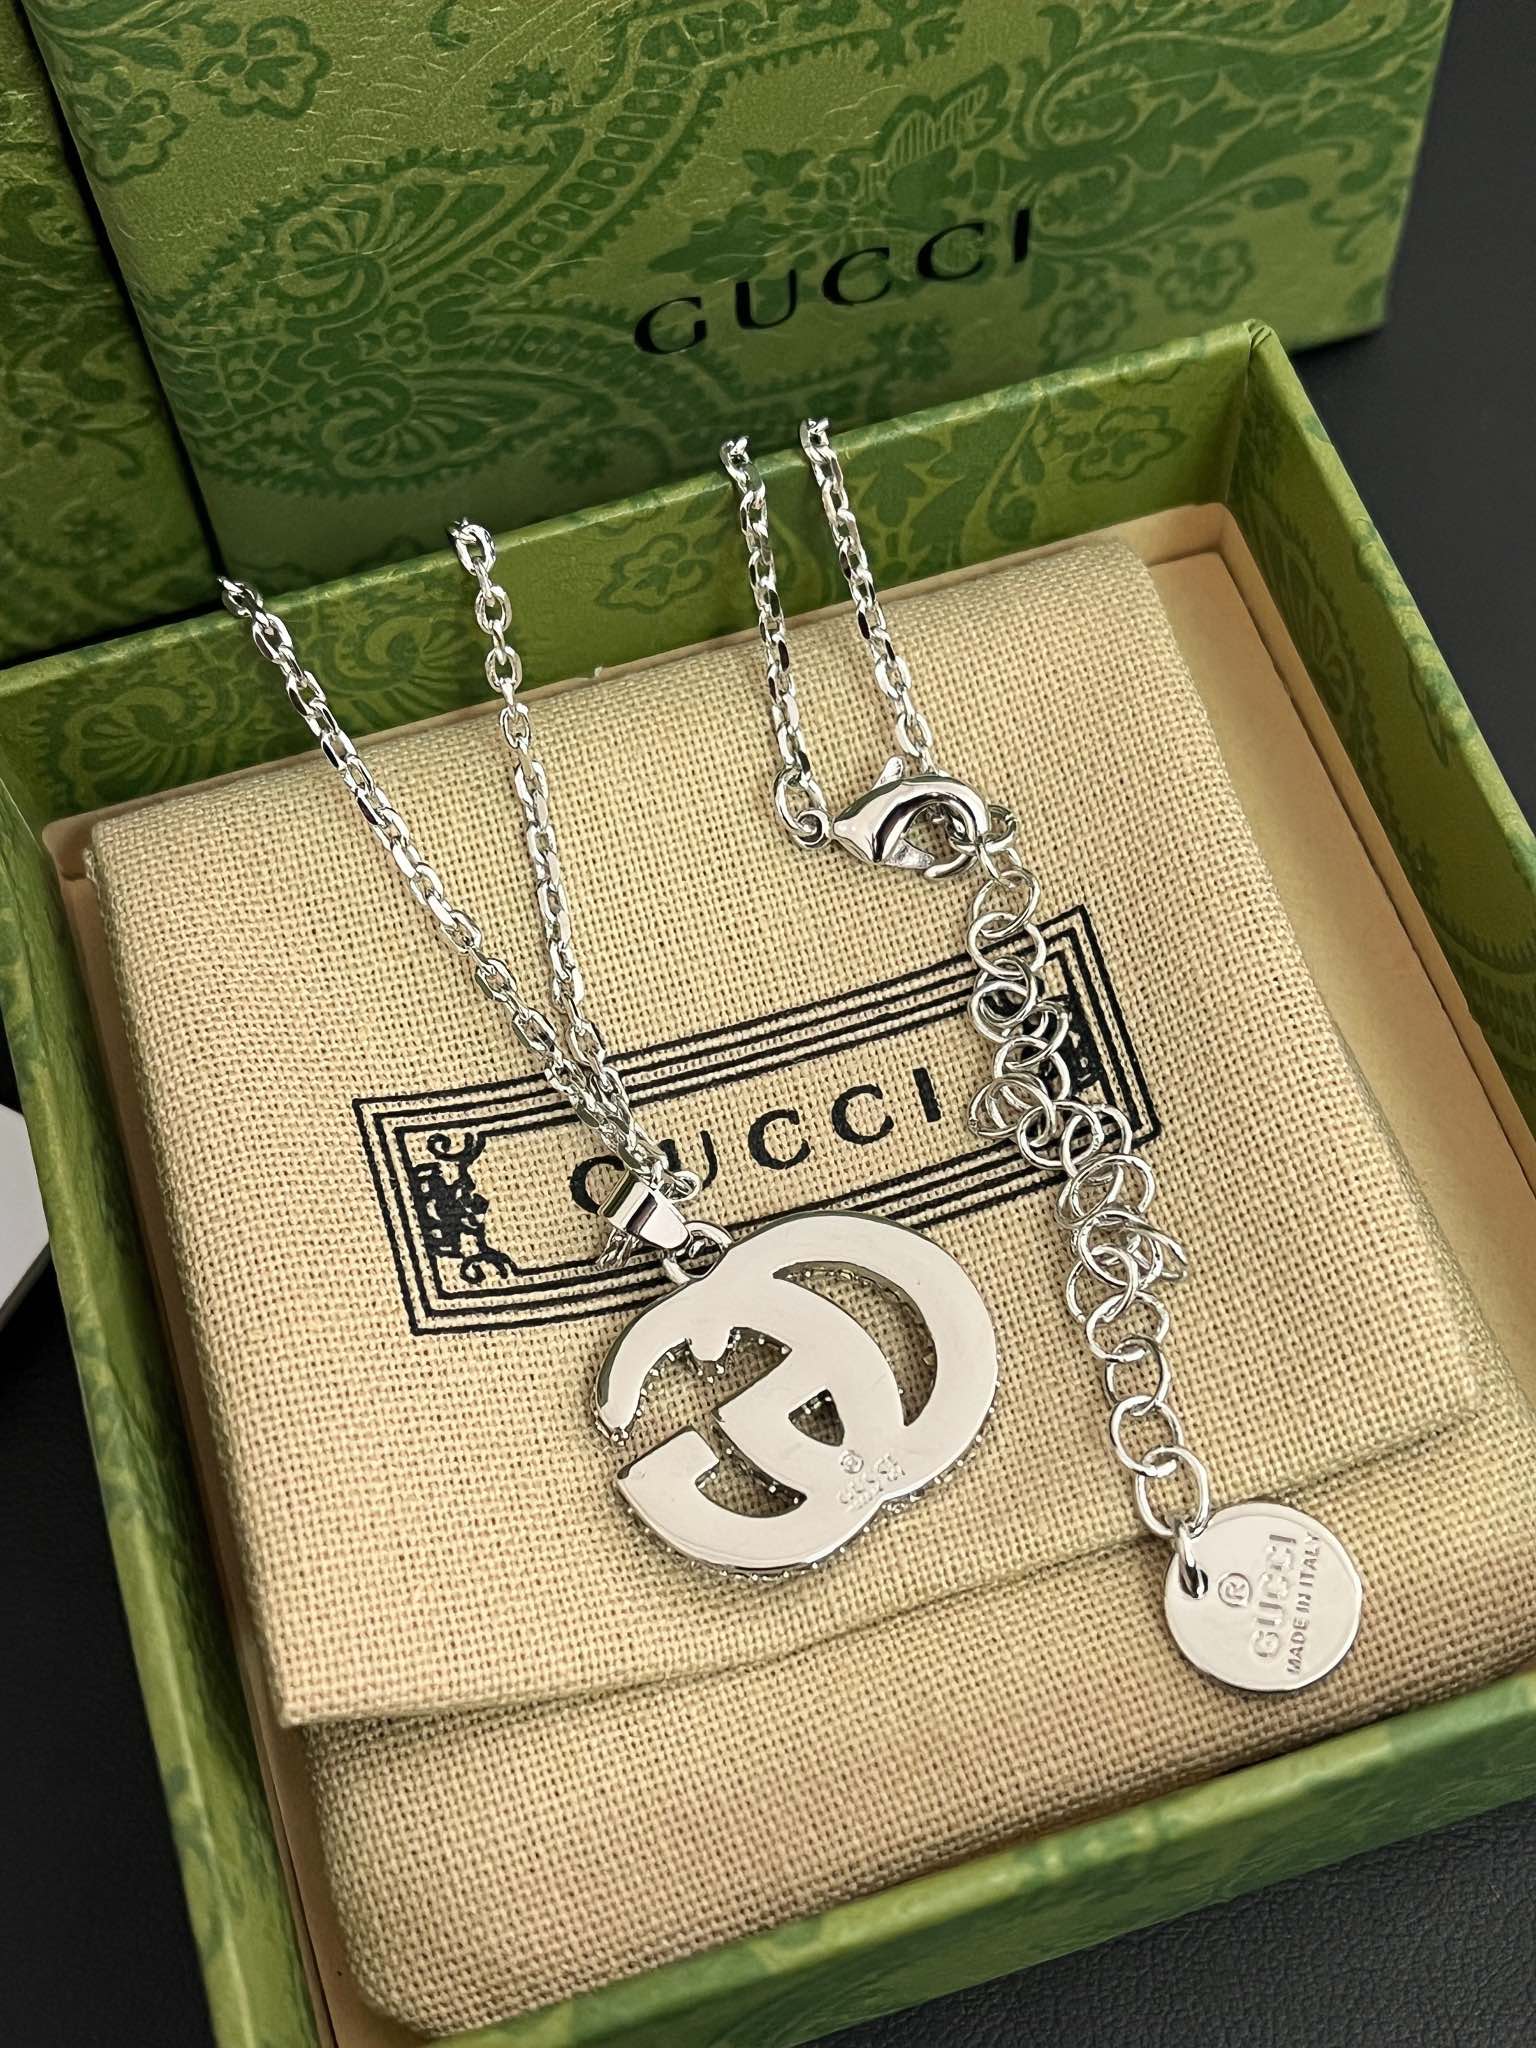 X576 Gucci crystal GG necklace